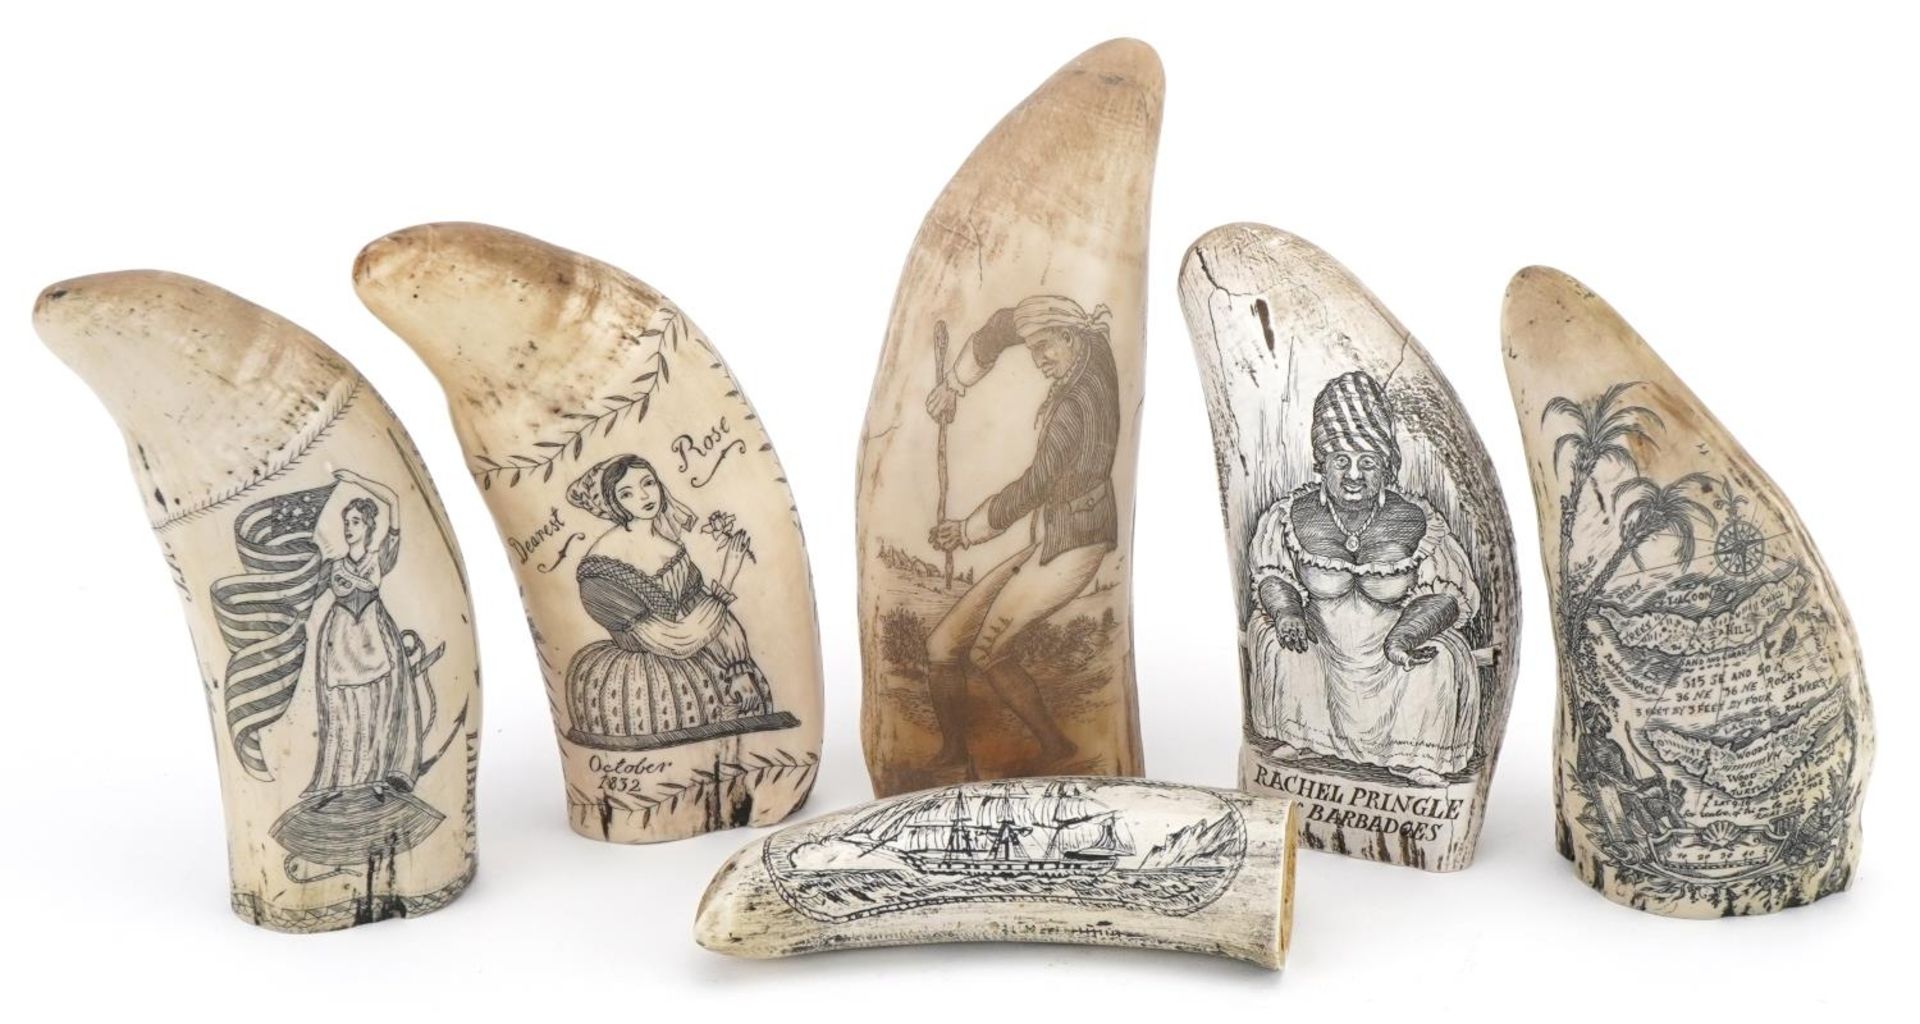 Six scrimshaw style decorative tusks decorated with figures and ships, the largest 16cm high